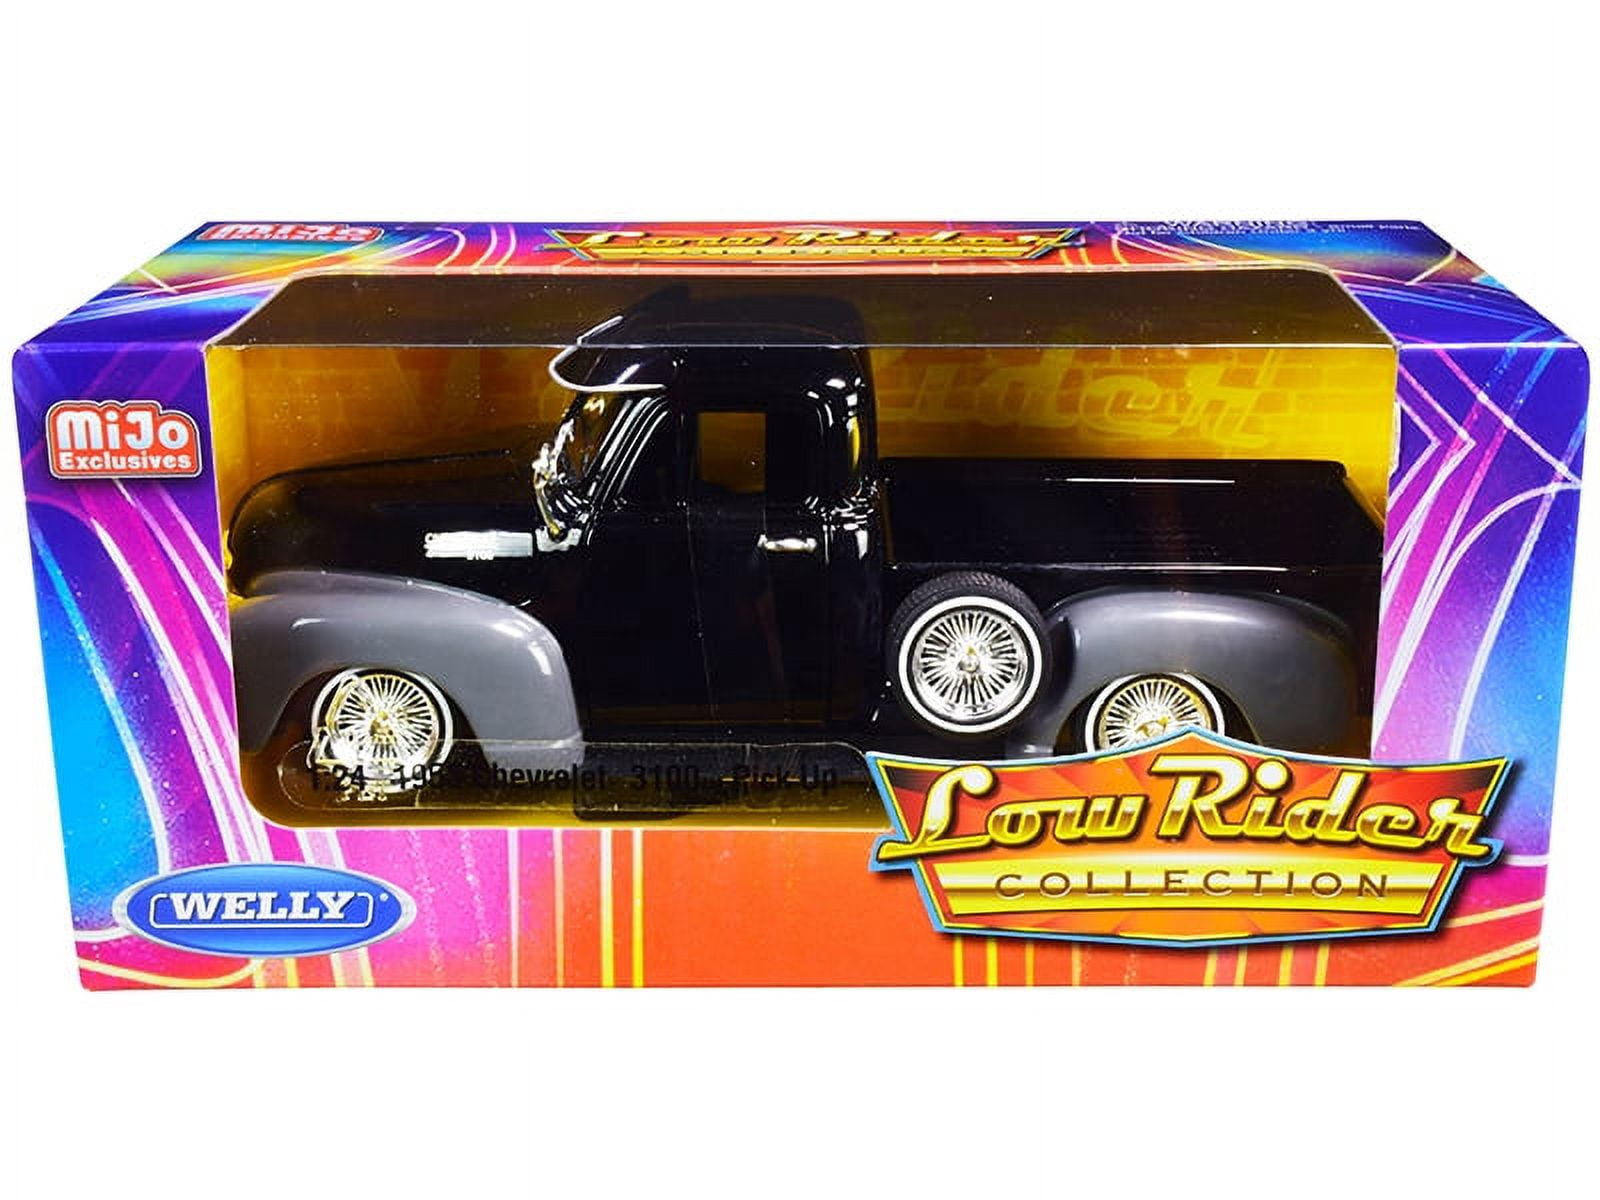 22087LRW-BK 1953 Chevrolet 3100 Pickup Truck Low Rider Collection 1 by 24 Scale Diecast Model Car, Black & Gray -  WELLY